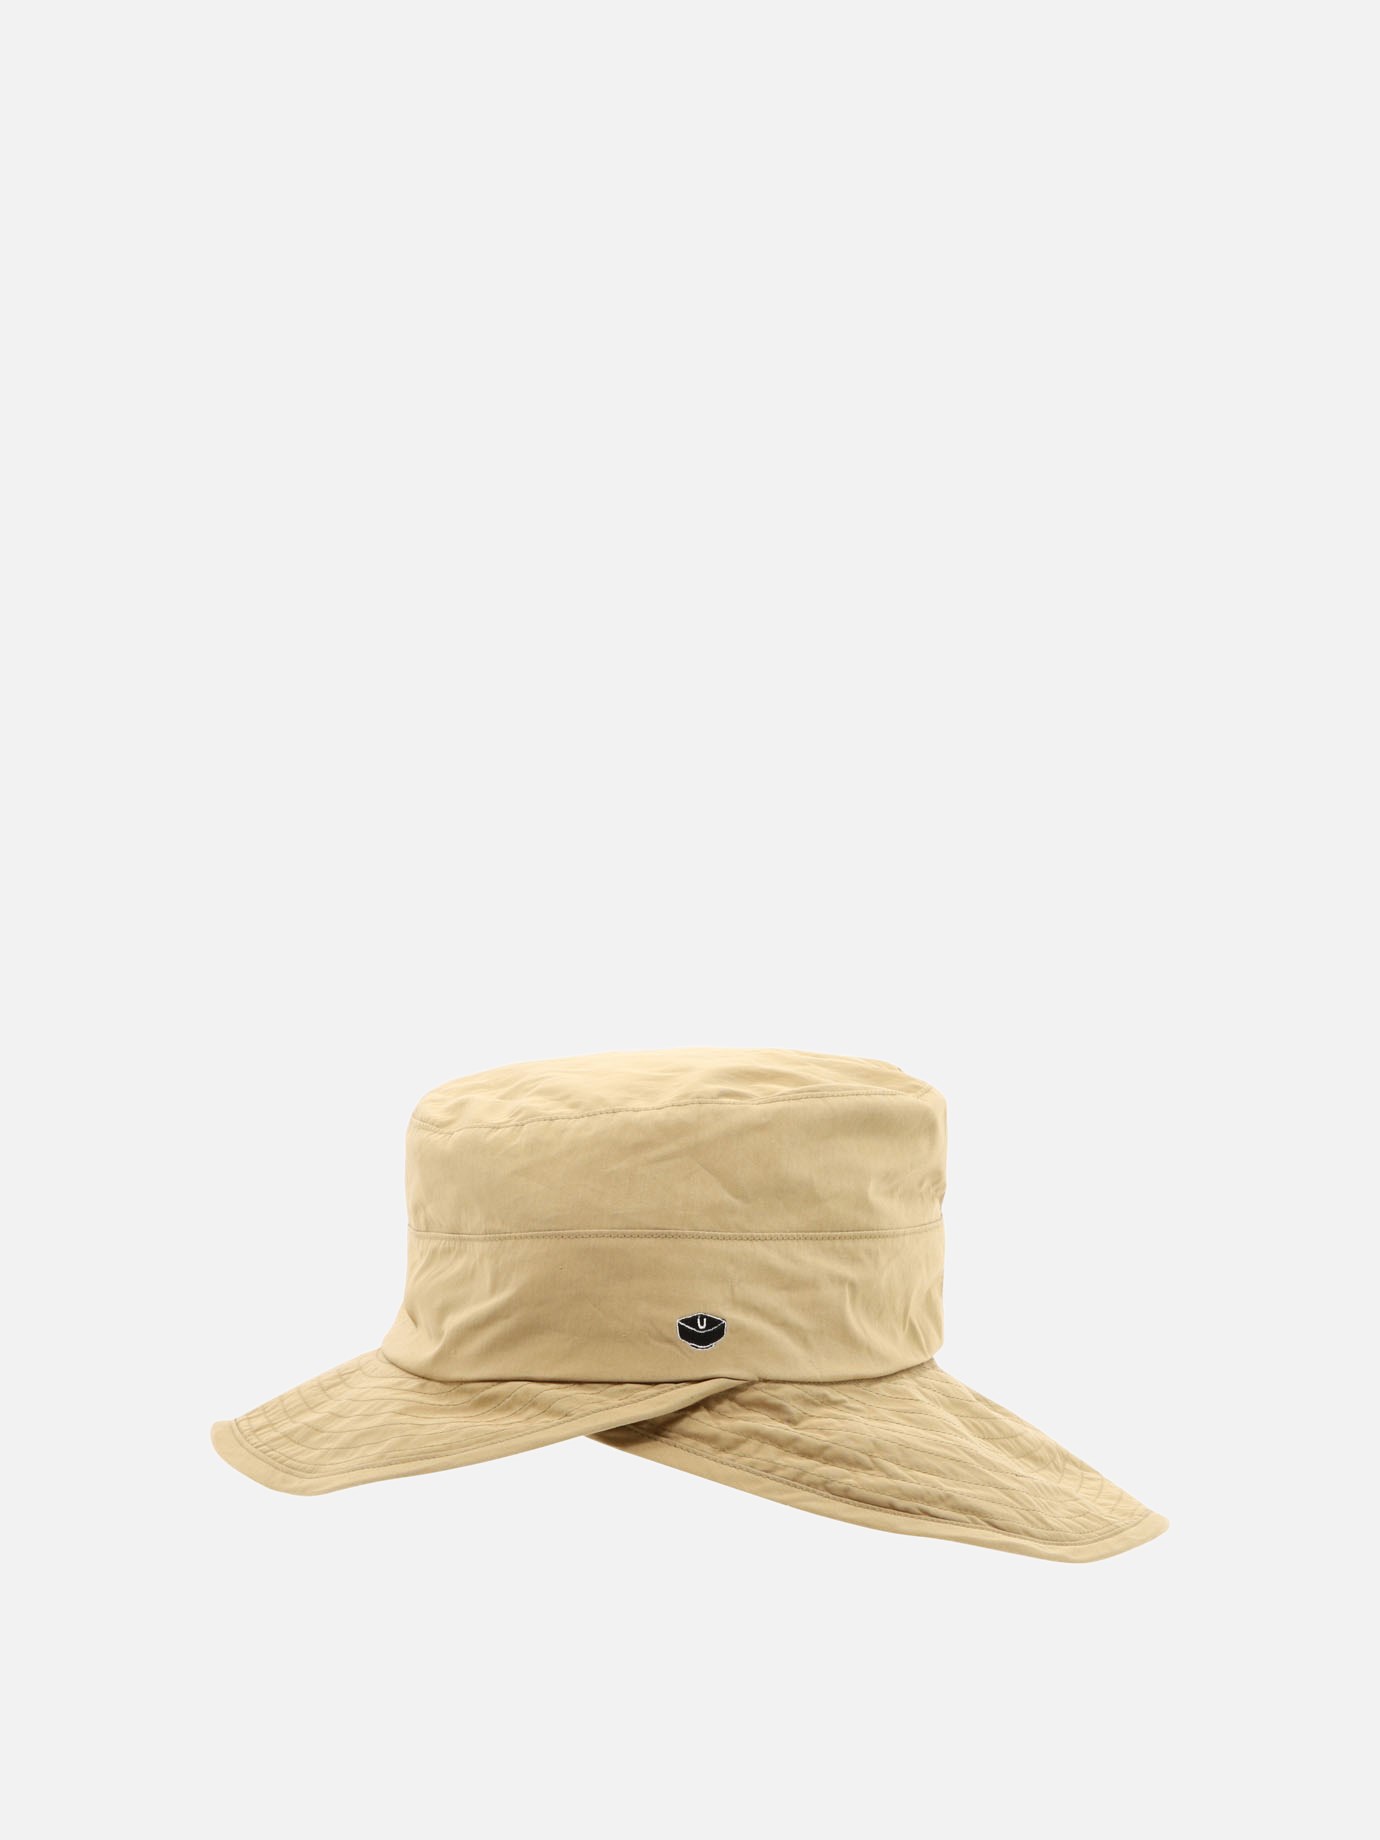 Cotton bucket hatby Undercover - 0